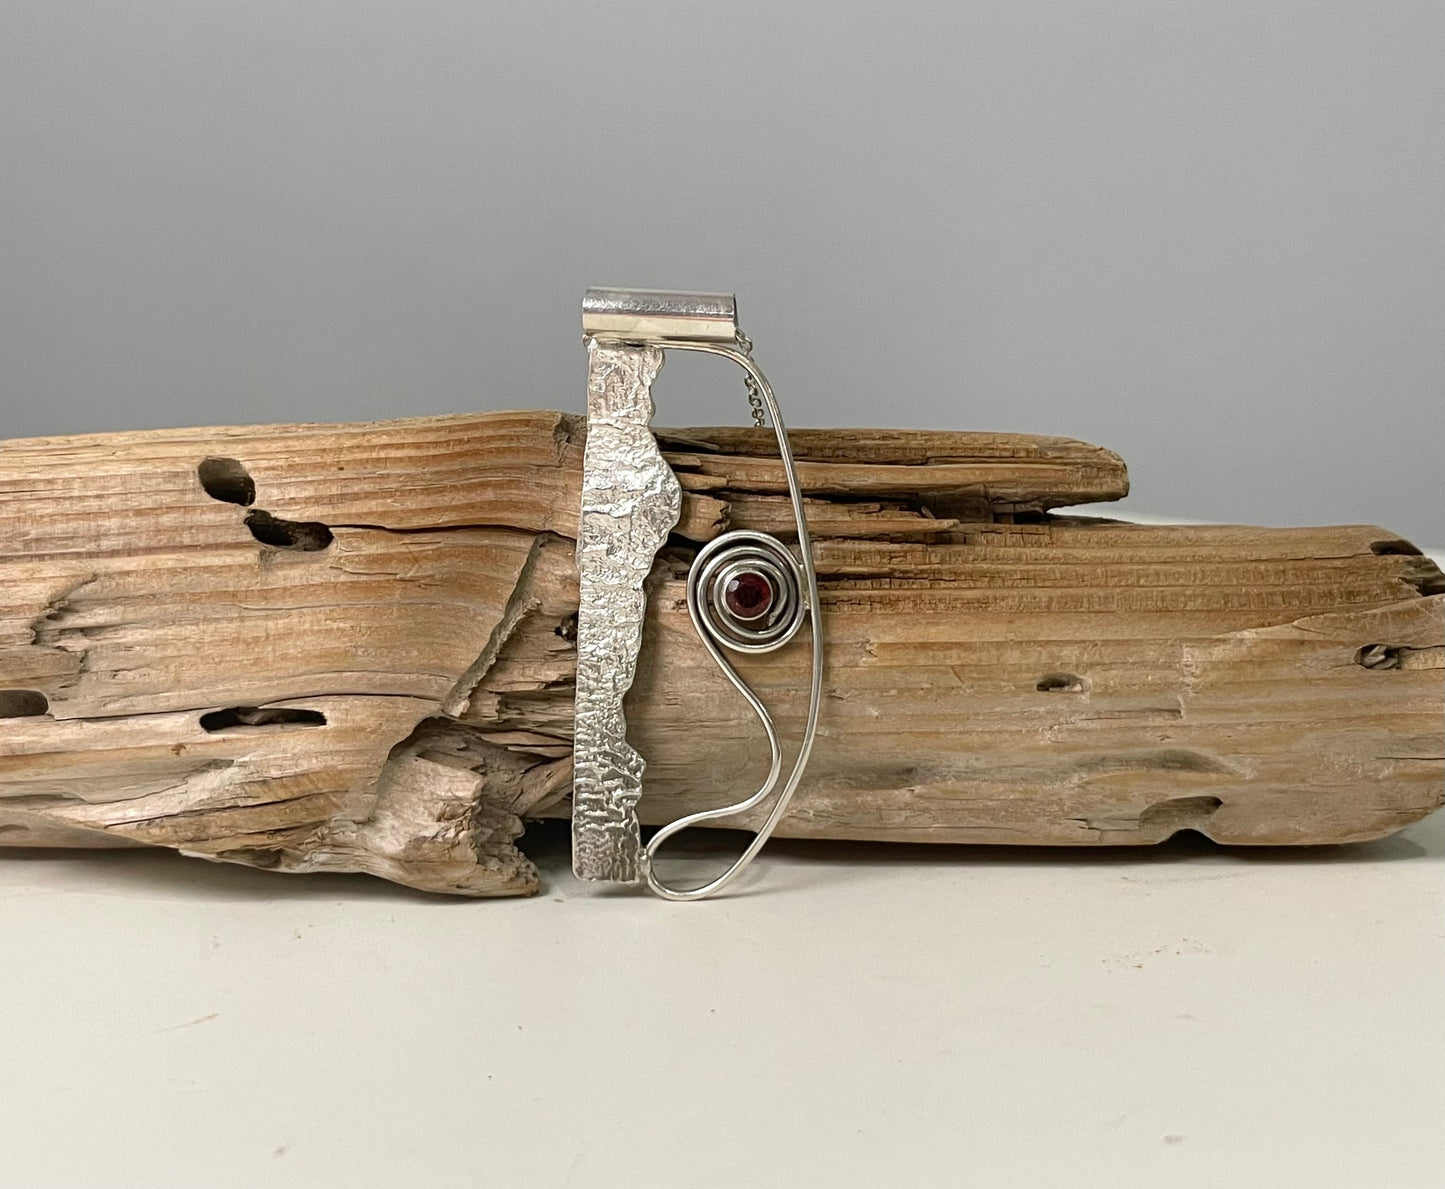 Reticulated Silver and Garnet Pendant